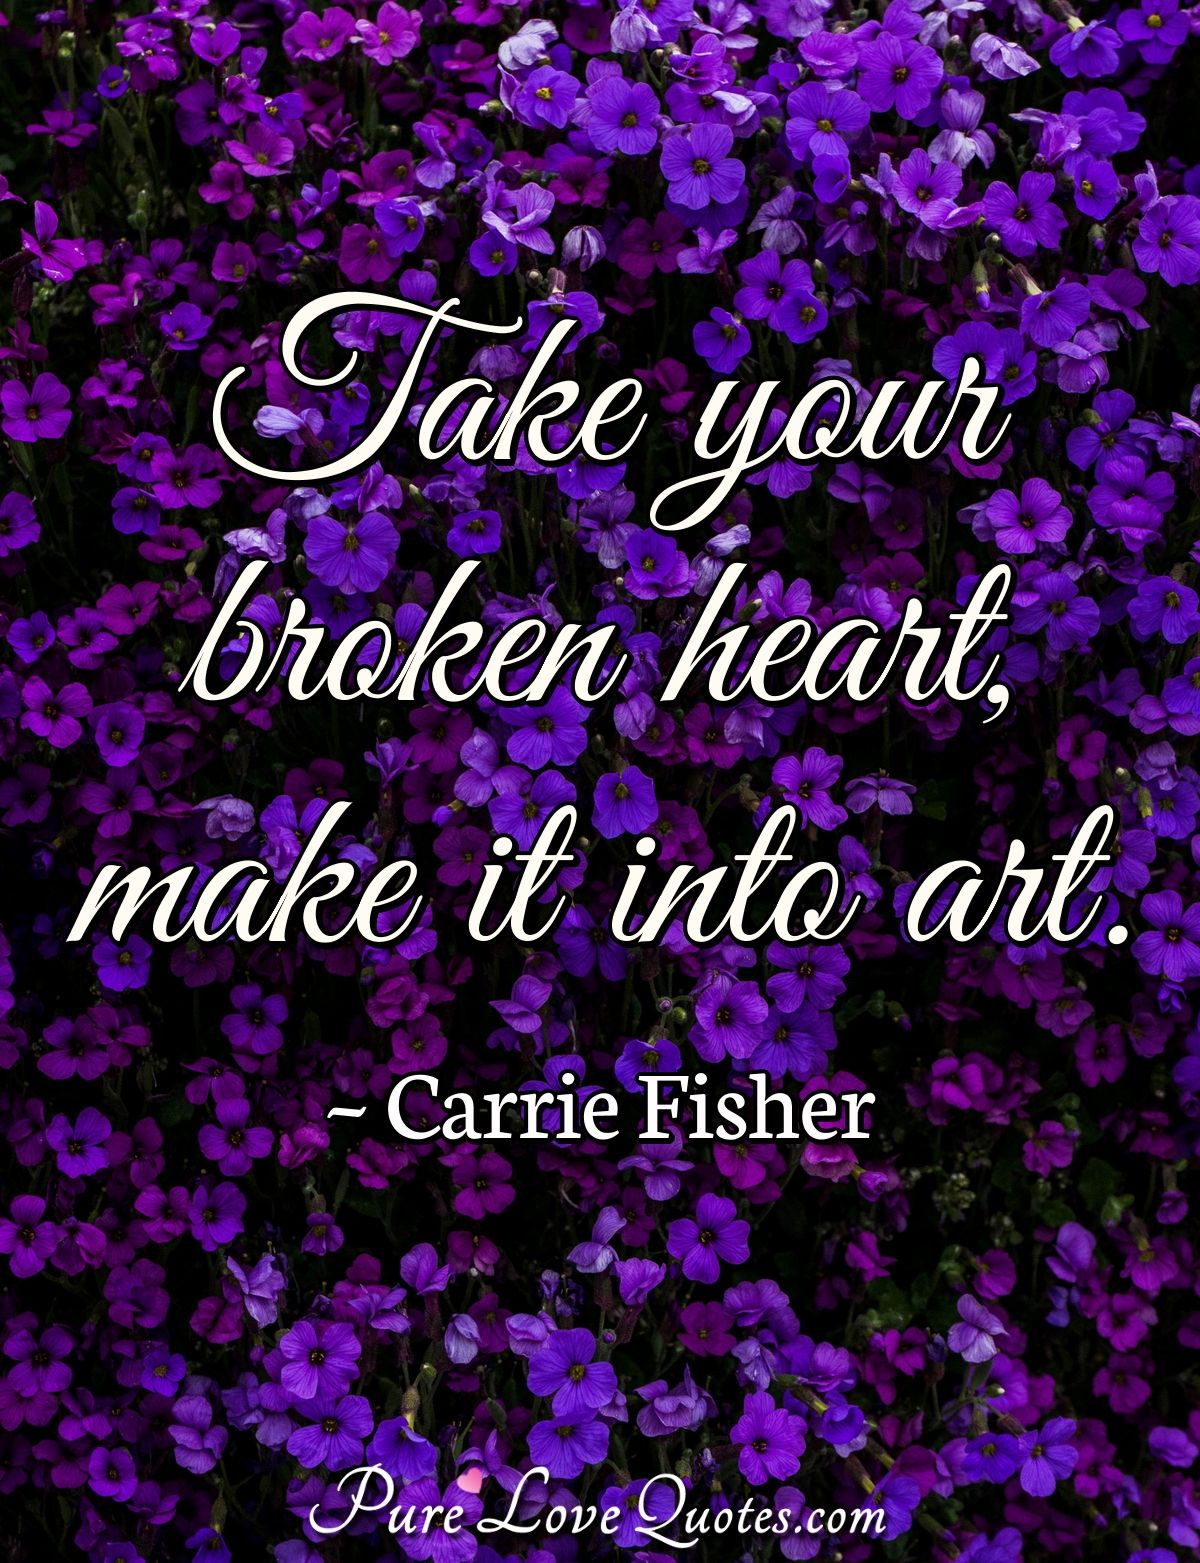 Take your broken heart, make it into art. - Carrie Fisher